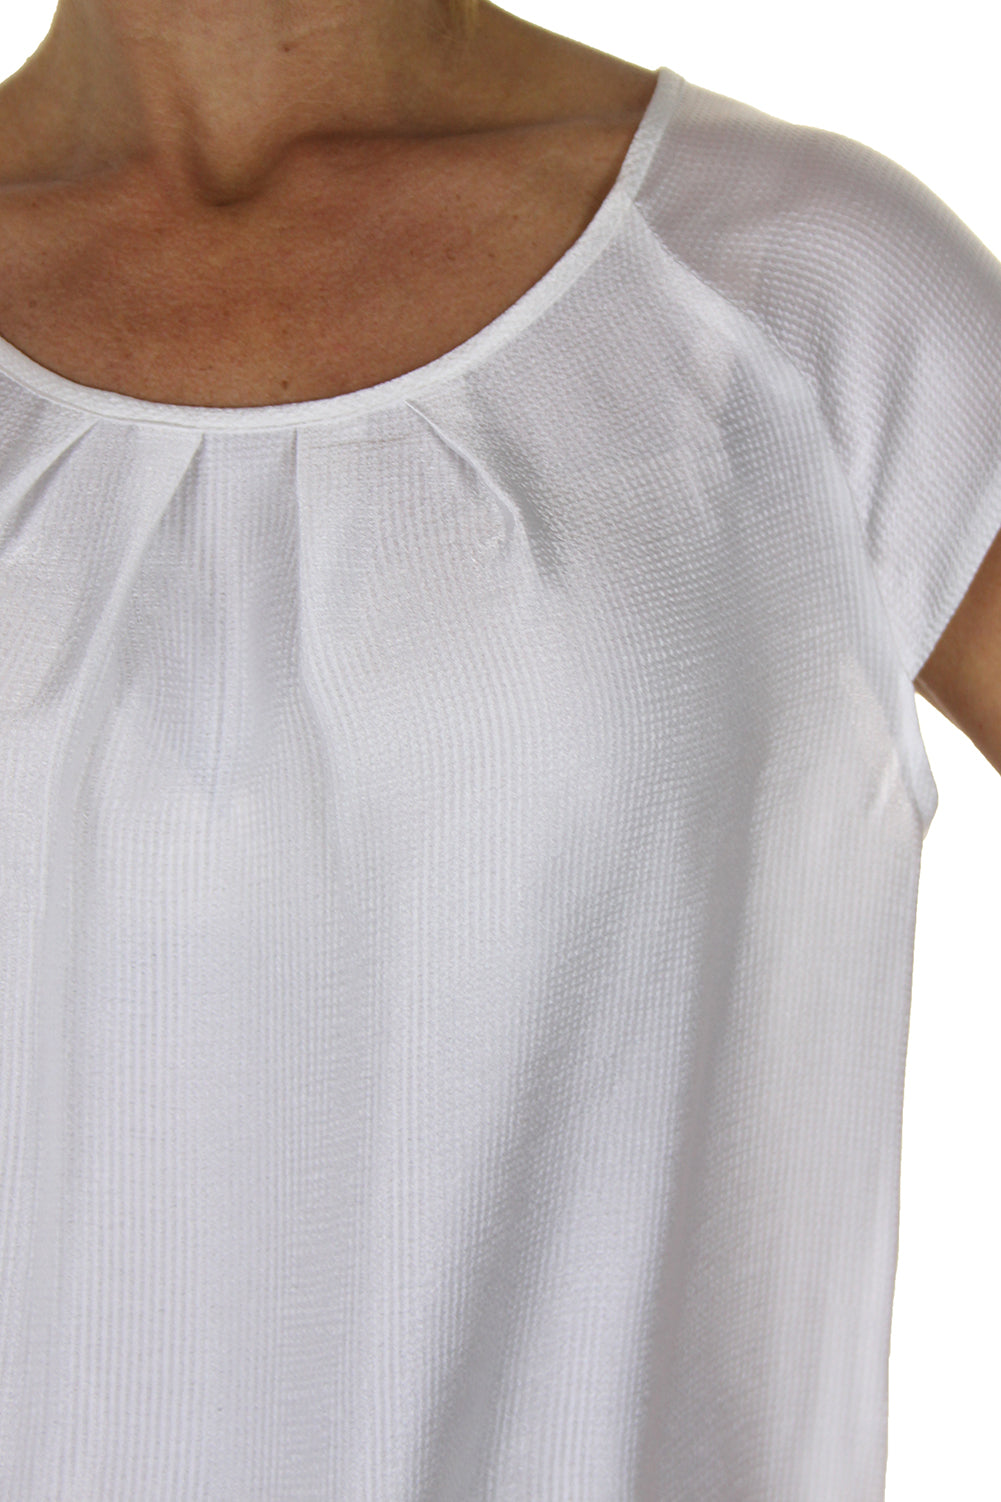 Silky Feel Textured Top With Shine White